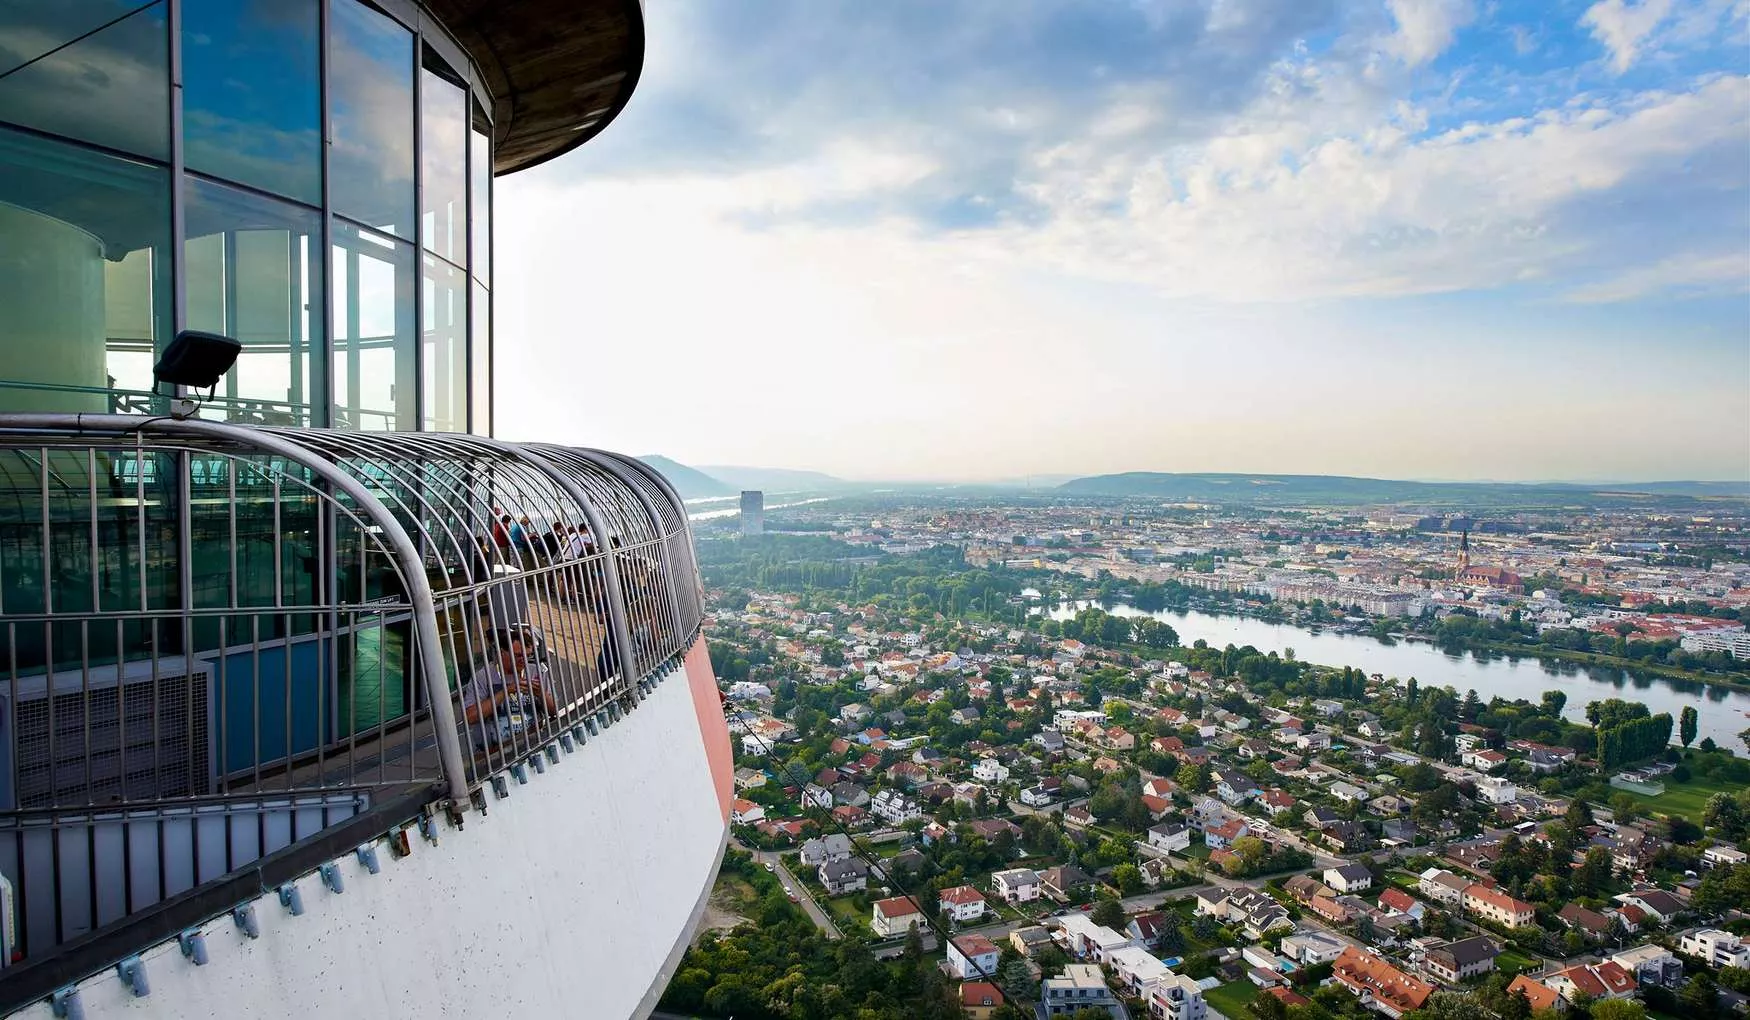 Danube Tower in Austria, Europe | Observation Decks,Bungee Jumping - Rated 9.6